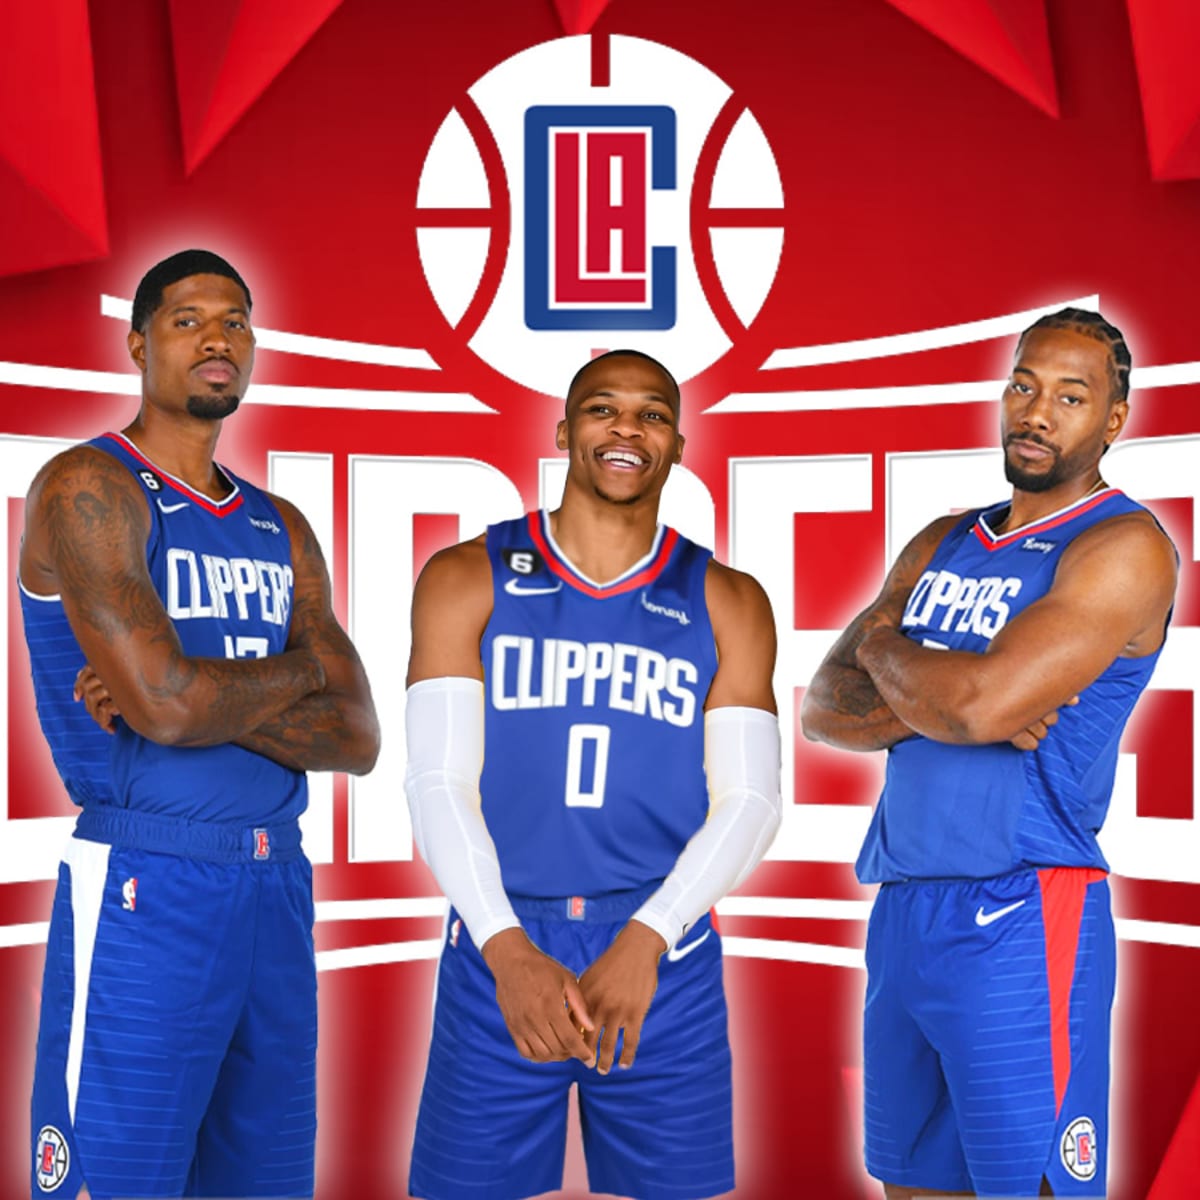 Anyonymous NBA exec on Clippers with Westbrook: I fear them less